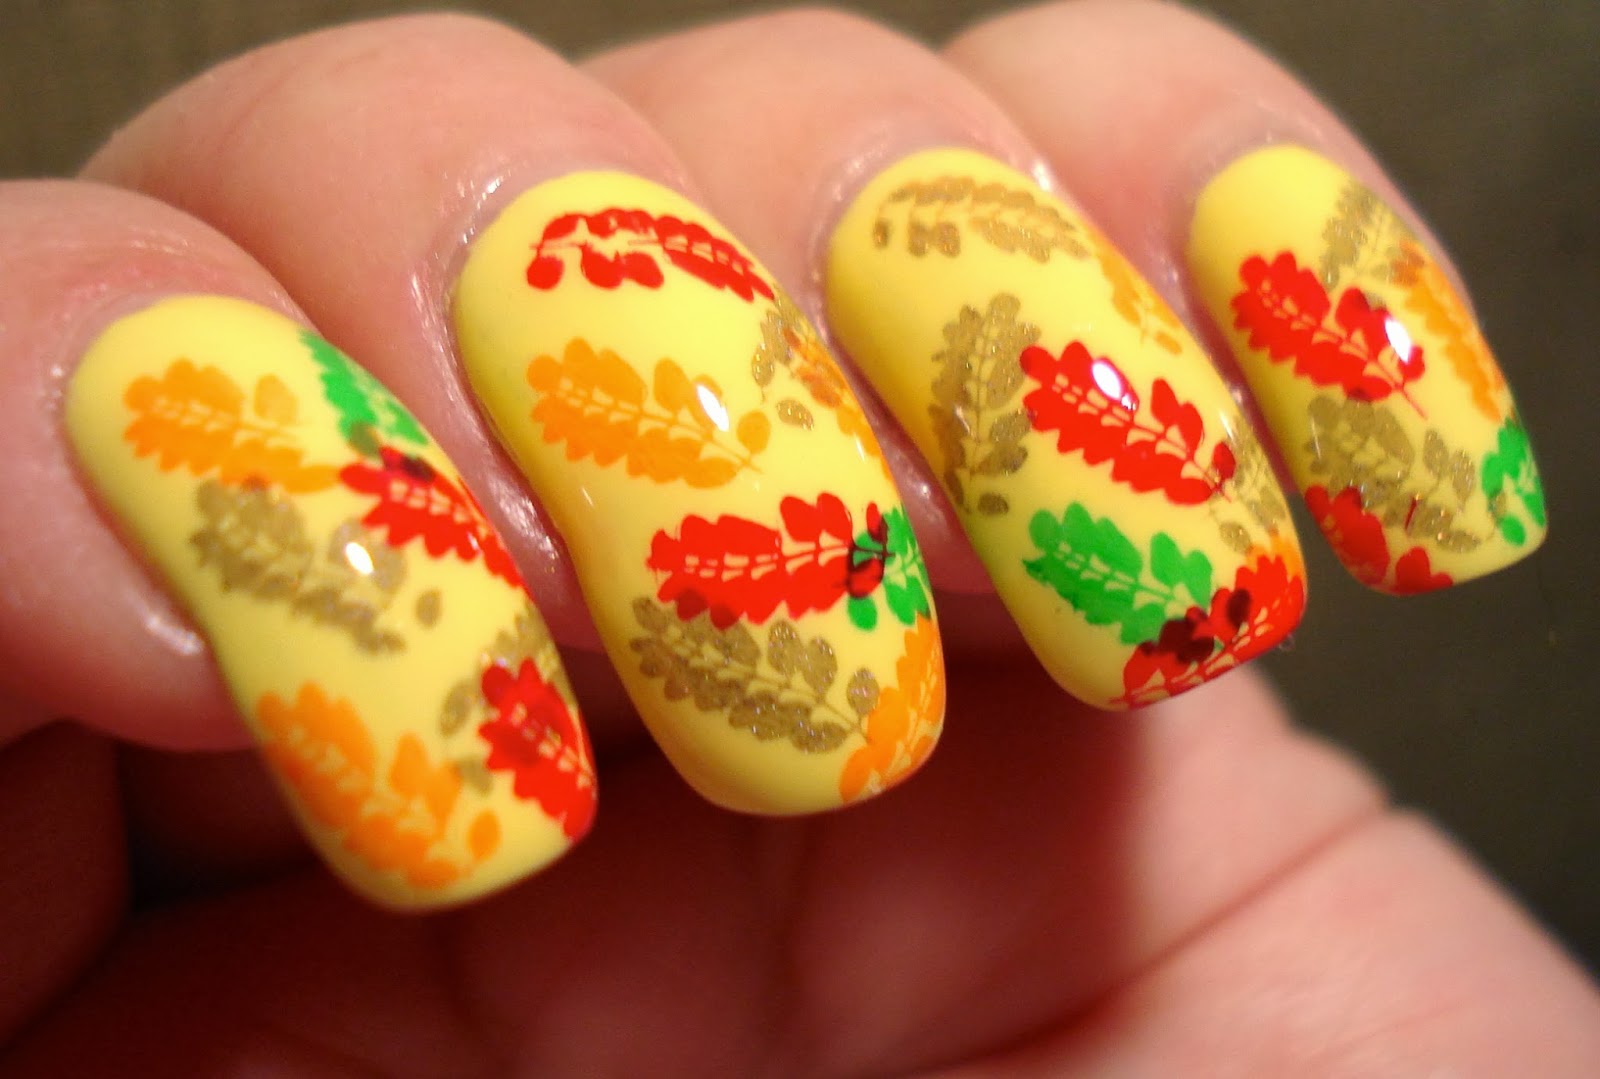 1. "Autumn Leaves" Nail Tips - wide 1